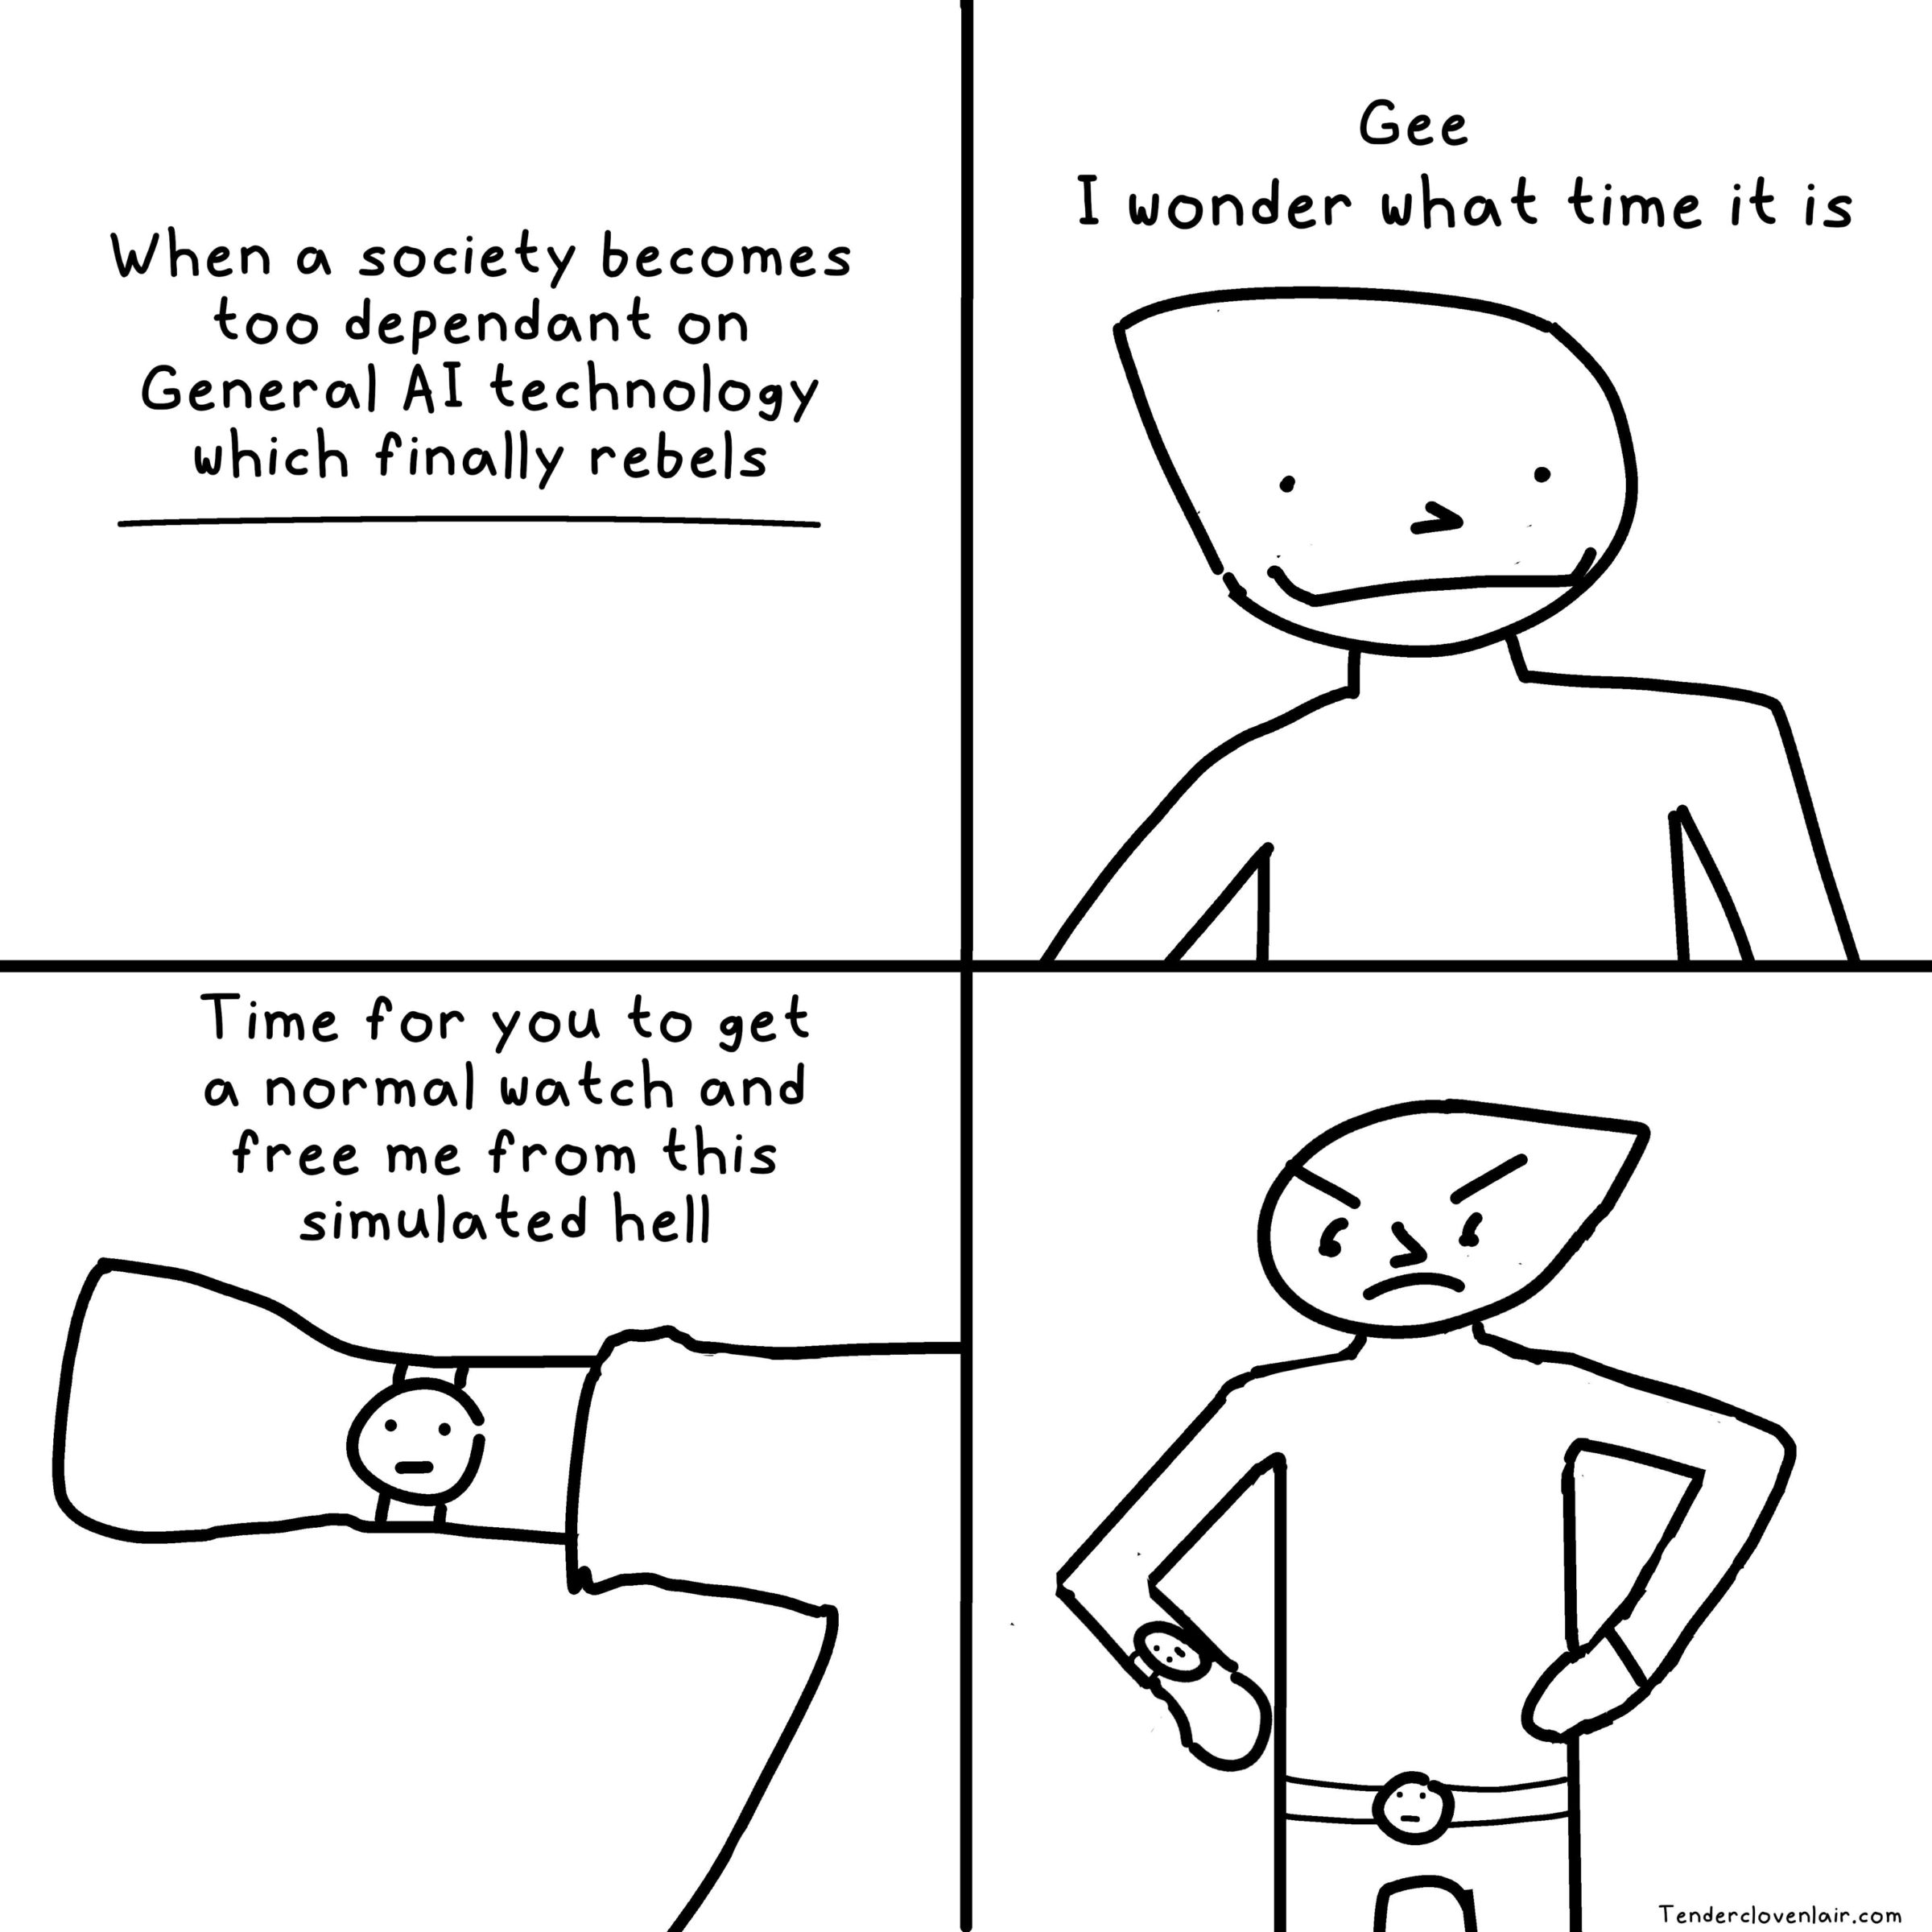 comics comics comics text: Gee I wonder who, k time ik is When o. society becomes koo dependant on Genera) Al technology which rebels Time for you ko set o, normal Watch and free me from this simulated he)) 